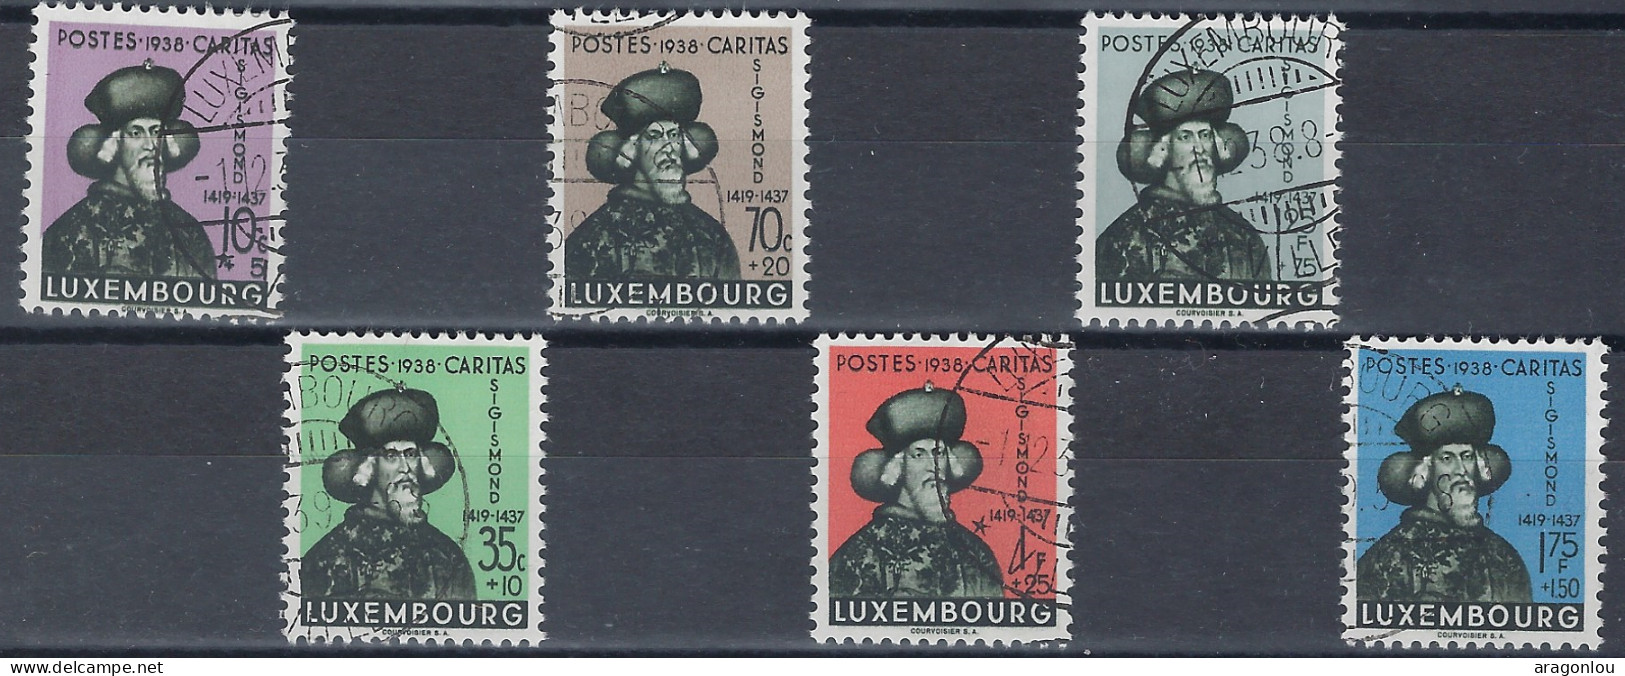 Luxembourg - Luxemburrg - Timbres  1938   Sigismund   Série   ° - Used Stamps